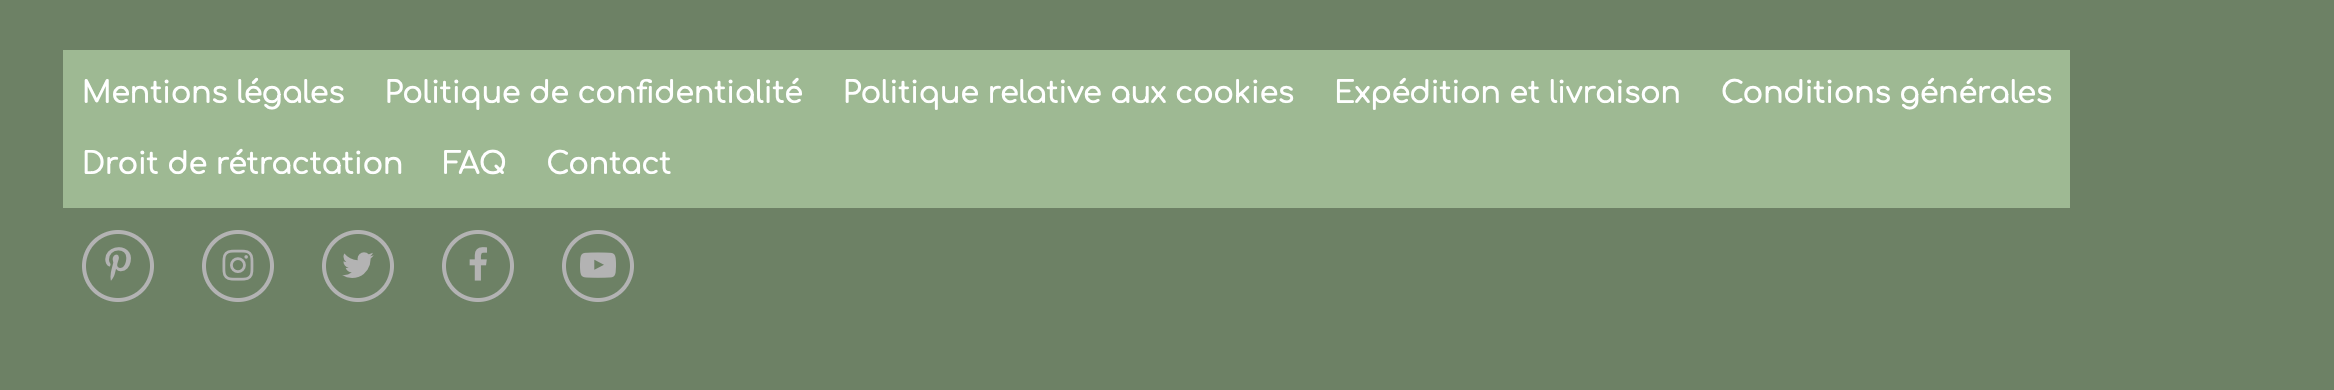 Footer_ShopView_FR.png